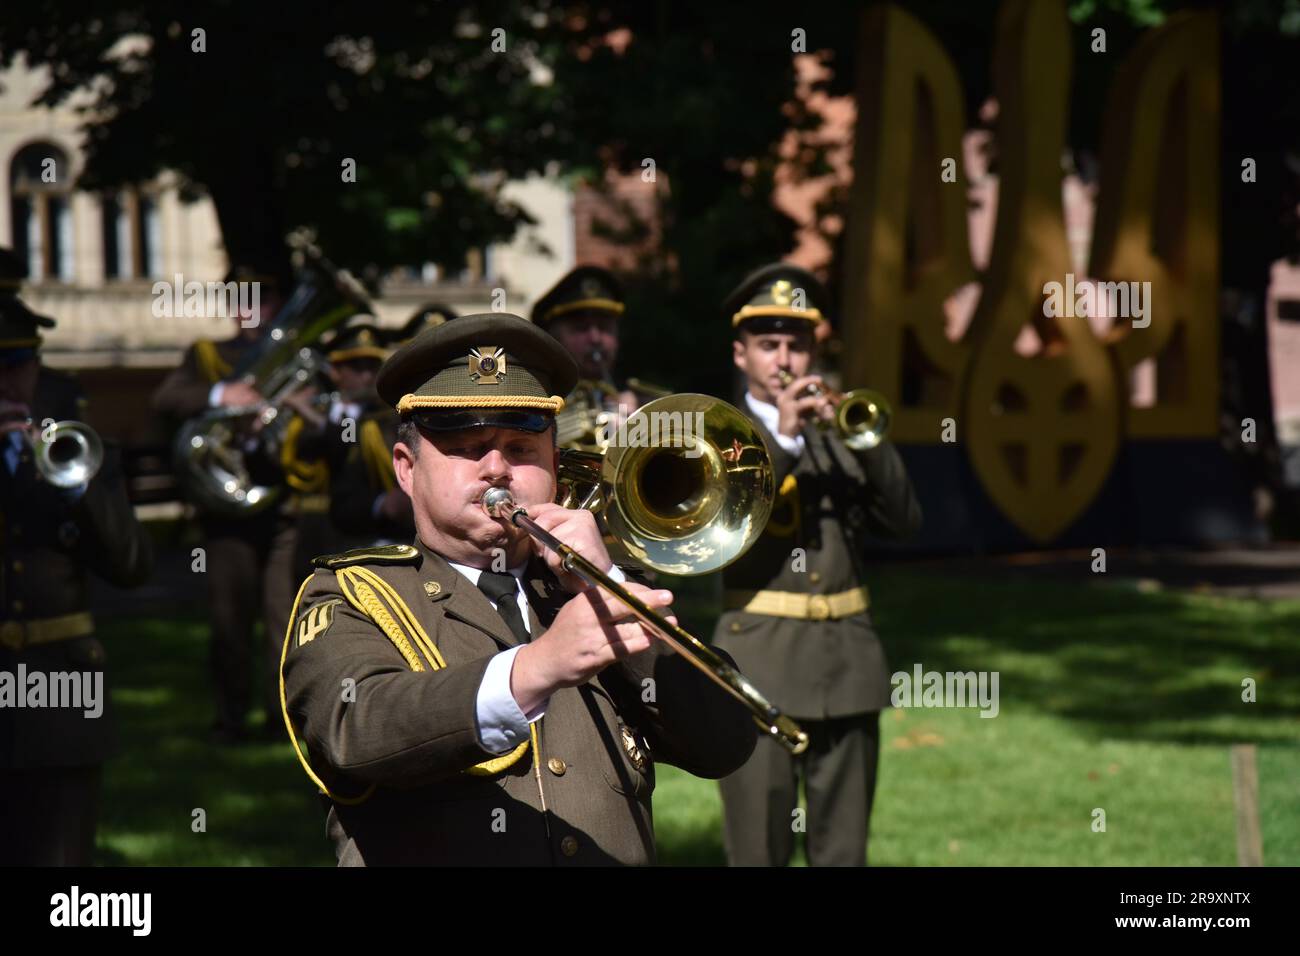 Lviv, Ukraine. 28th June, 2023. The military band during the celebration of the Constitution Day of Ukraine. Ukraine celebrated the 27th anniversary of the adoption of the country's basic law - the constitution. In the conditions of the Russian-Ukrainian war, official events were very short. In Lviv, the Ukrainian flag was raised, honor guard marched, and a military band performed. Credit: SOPA Images Limited/Alamy Live News Stock Photo